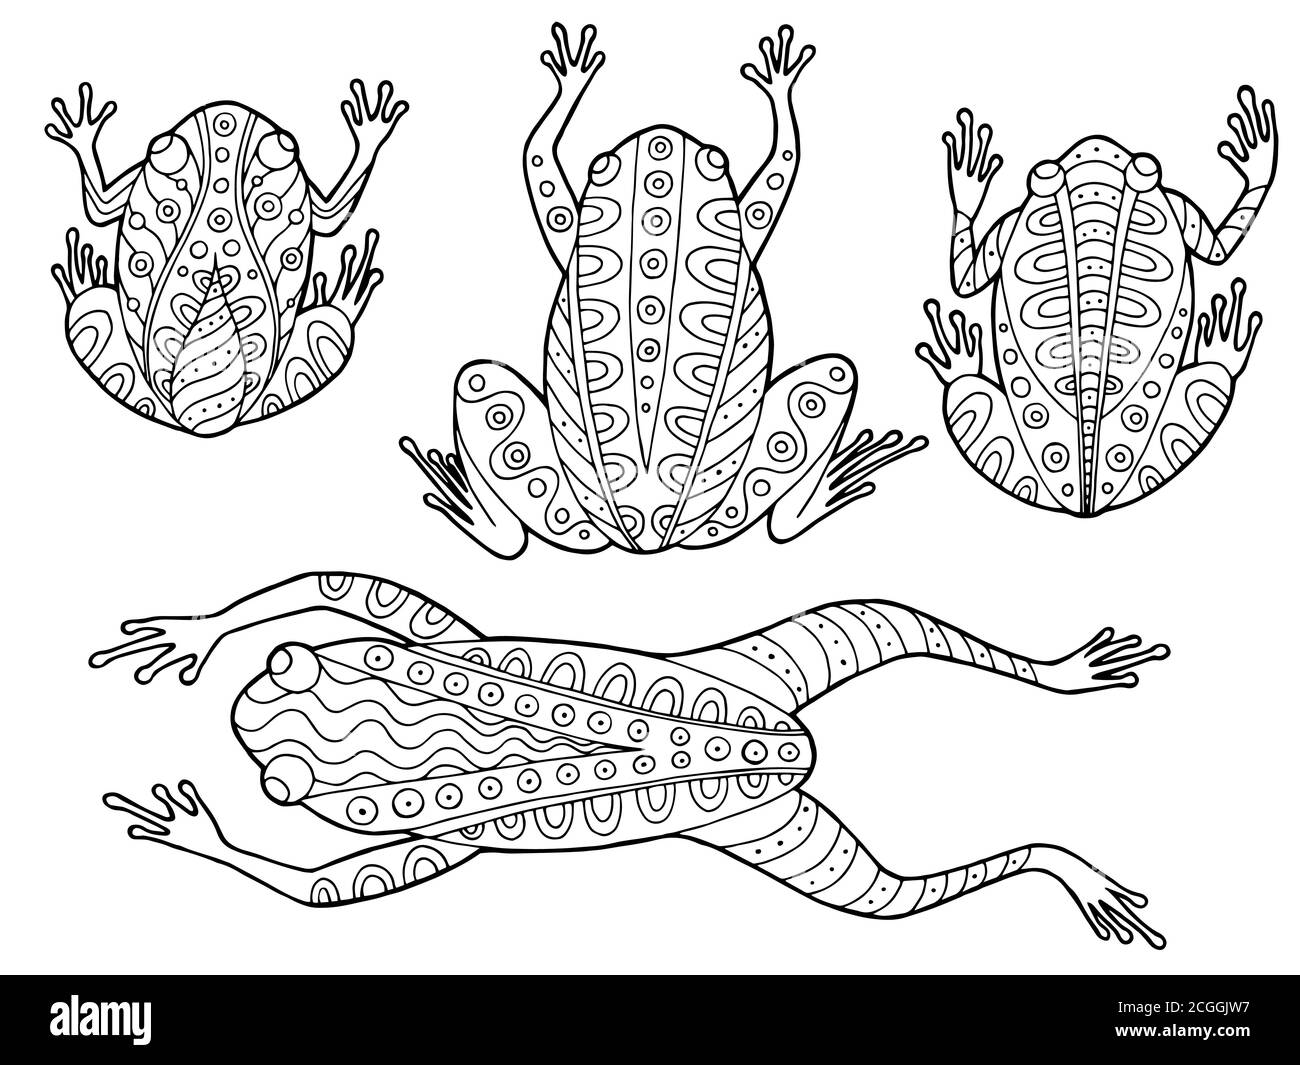 Frog sketch black and white stock photos images